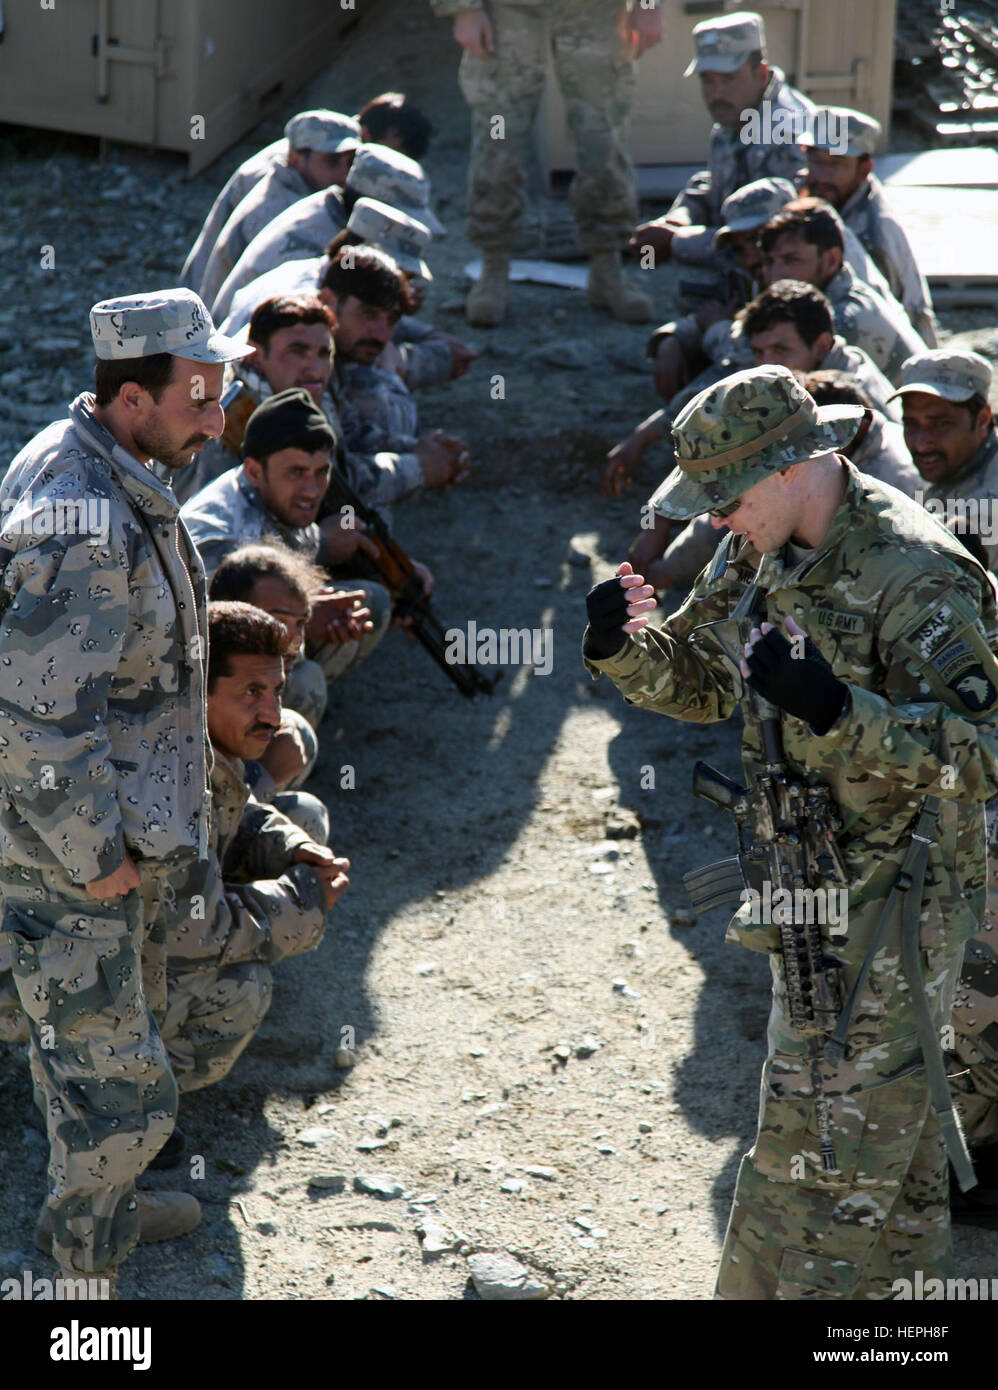 Afghan Border Patrol soldiers receive 'cold load' training from U.S. Army soldiers. A U.S. Army soldier is simulating how to properly load and unload a CH-47 Chinook on Forward Operating Base Joyce, Kunar province, Afghanistan, March 9, 2011. Supply Drop in Kunar Province 385406 Stock Photo